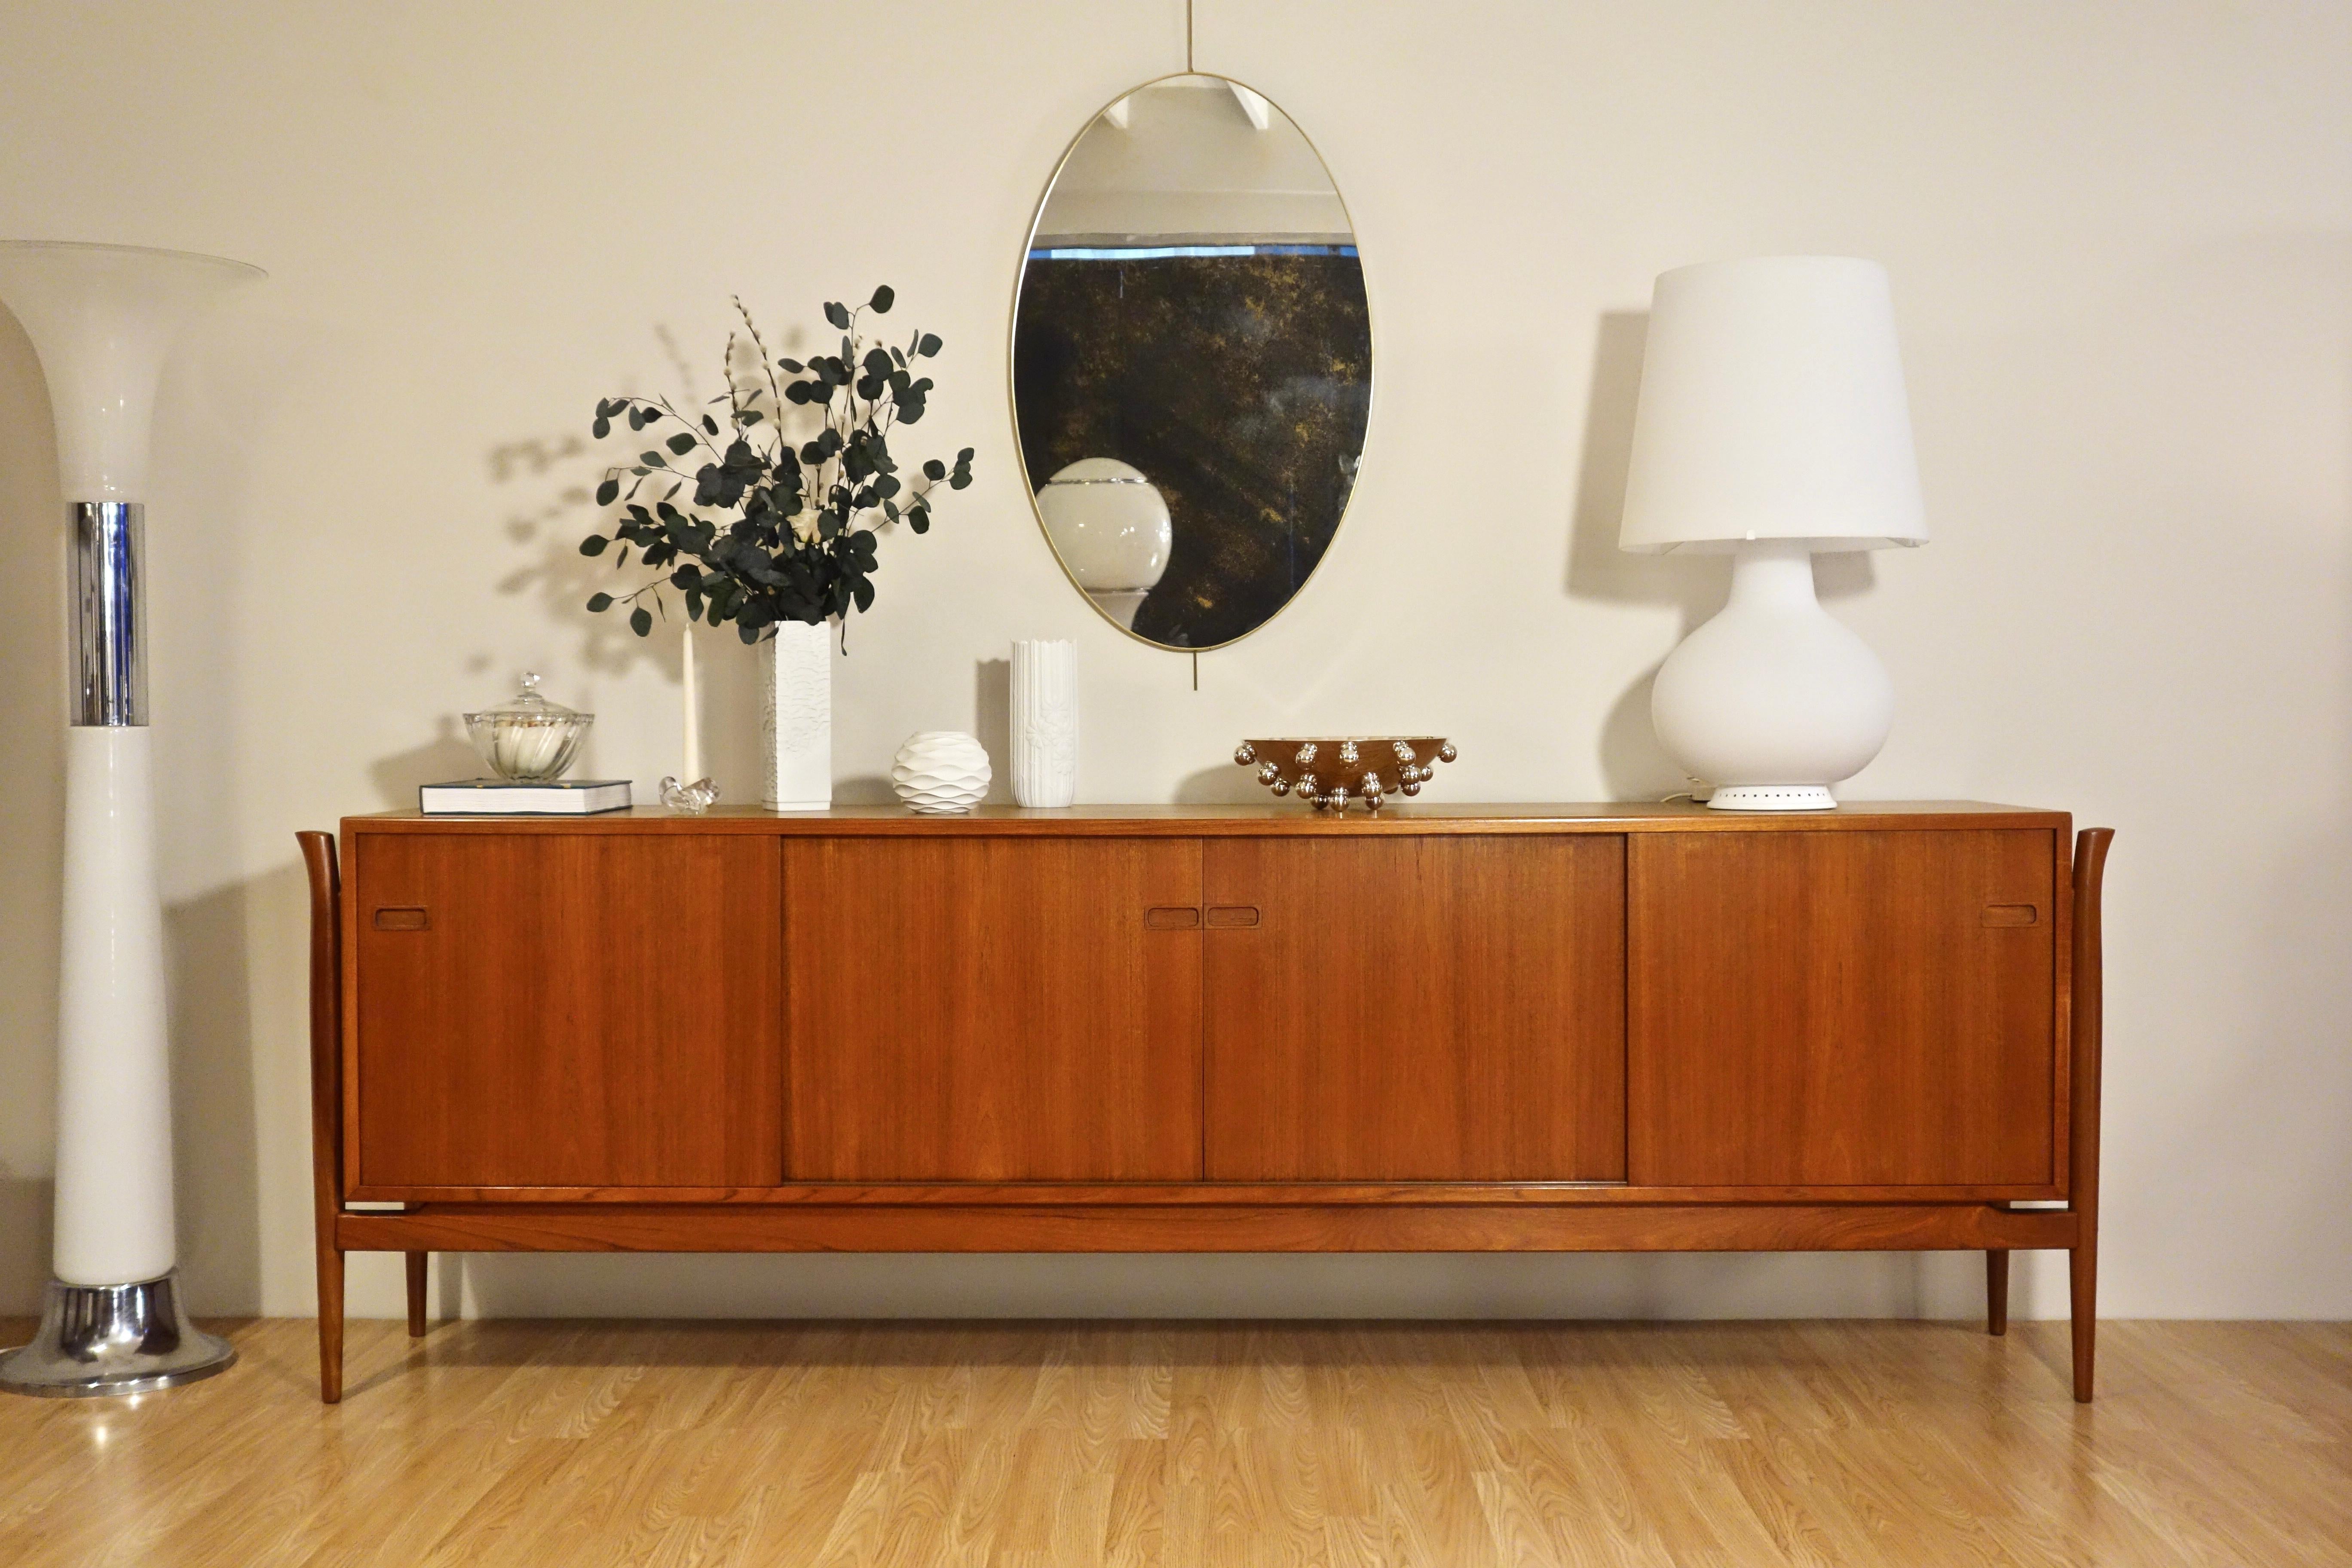 Scandinavian sideboard attributed to the famous designer Finn Juhl from the 1960's. Very well made Danish manufacturing produced by Samcom (stamped on the back). Rare teak model with offset legs
4 sliding doors and integrated handles. It consists of